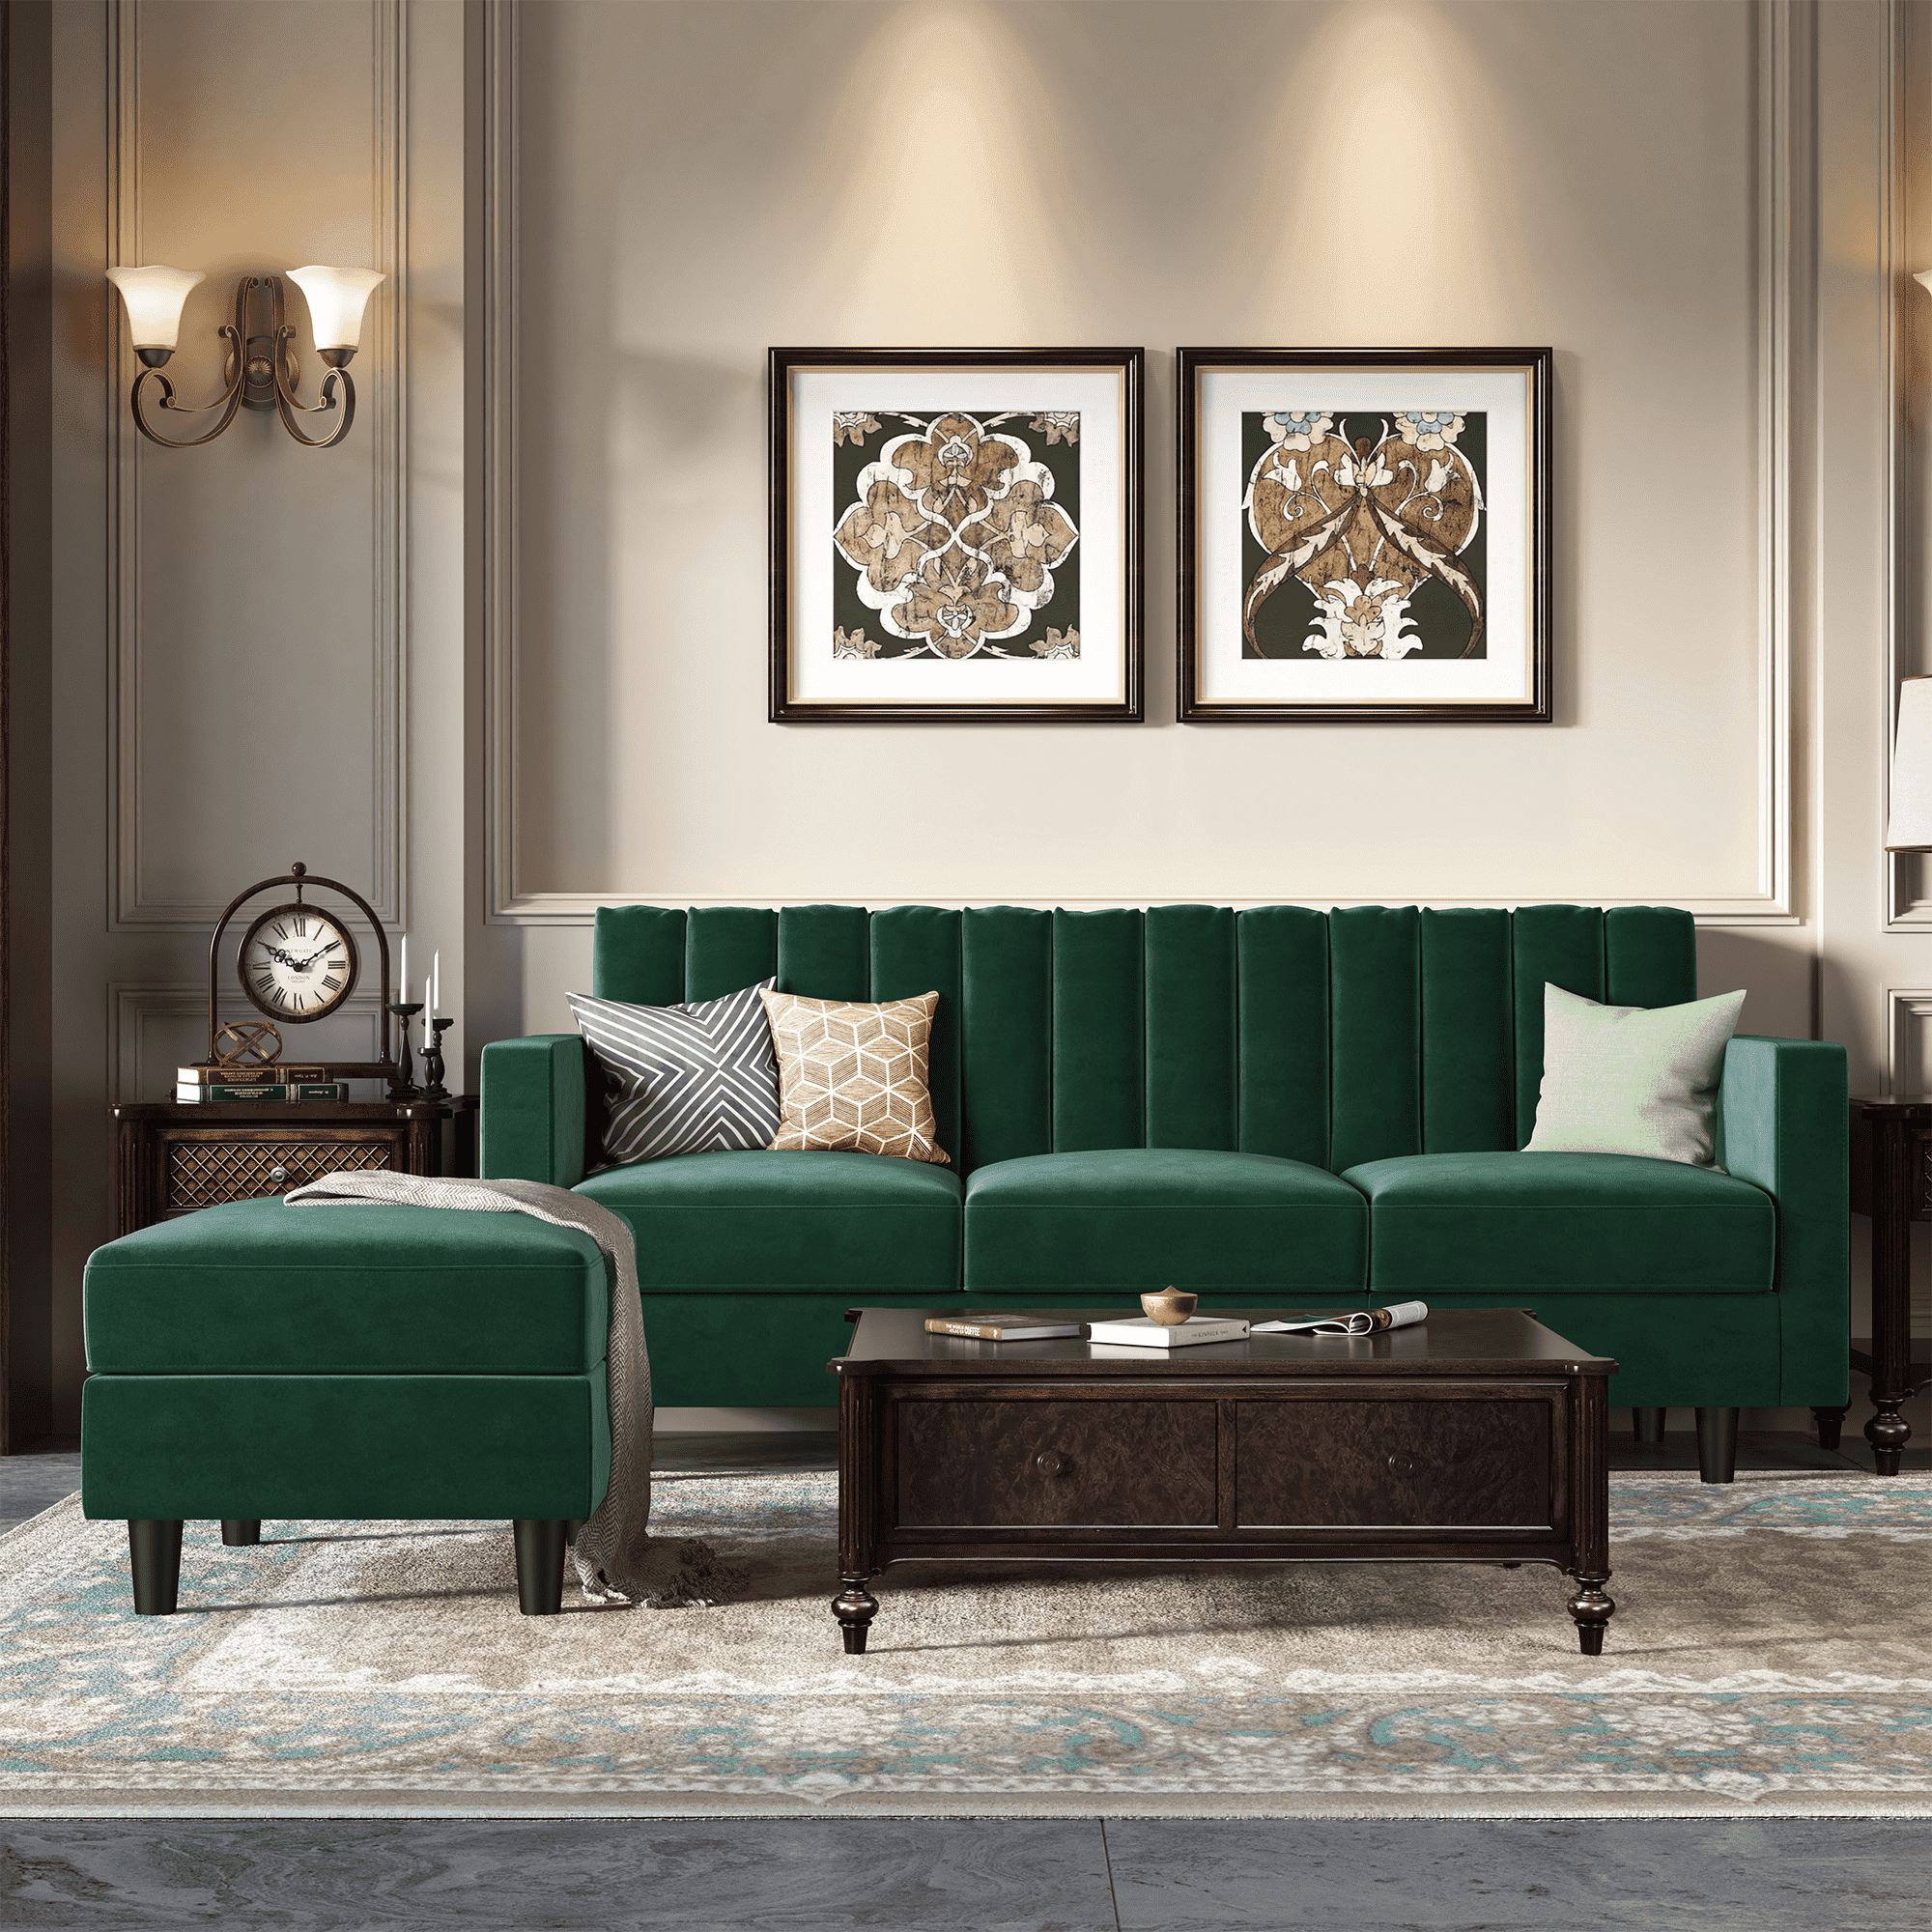 Honbay Mid Century Velvet Sectional Sofa Couch With Double Chaise With  Ottoman, Green – Walmart Throughout Green Velvet Modular Sectionals (View 15 of 15)